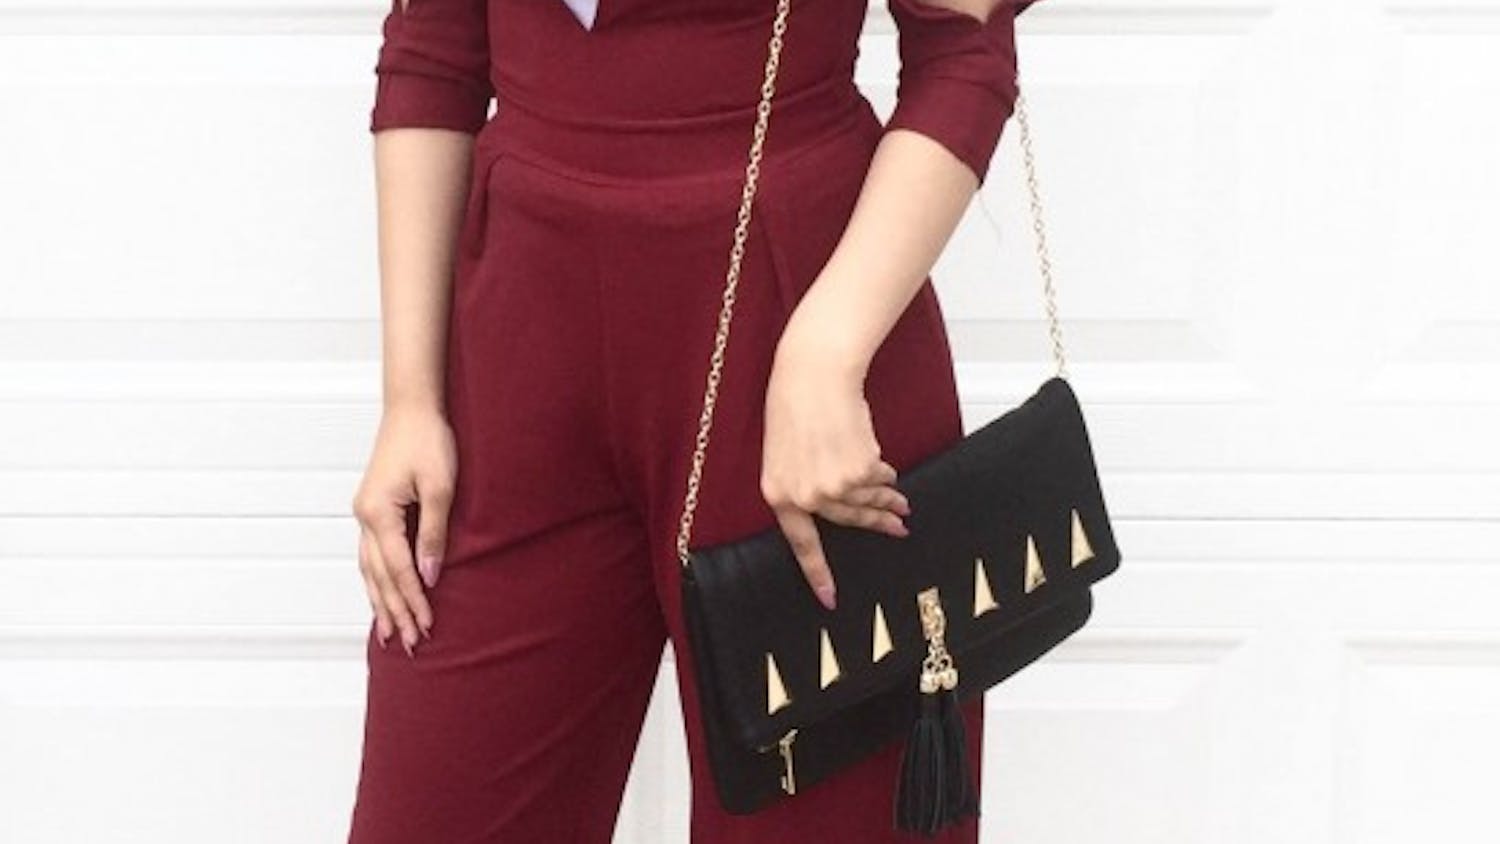 Find a similar clutch here!Find similar shoes here!